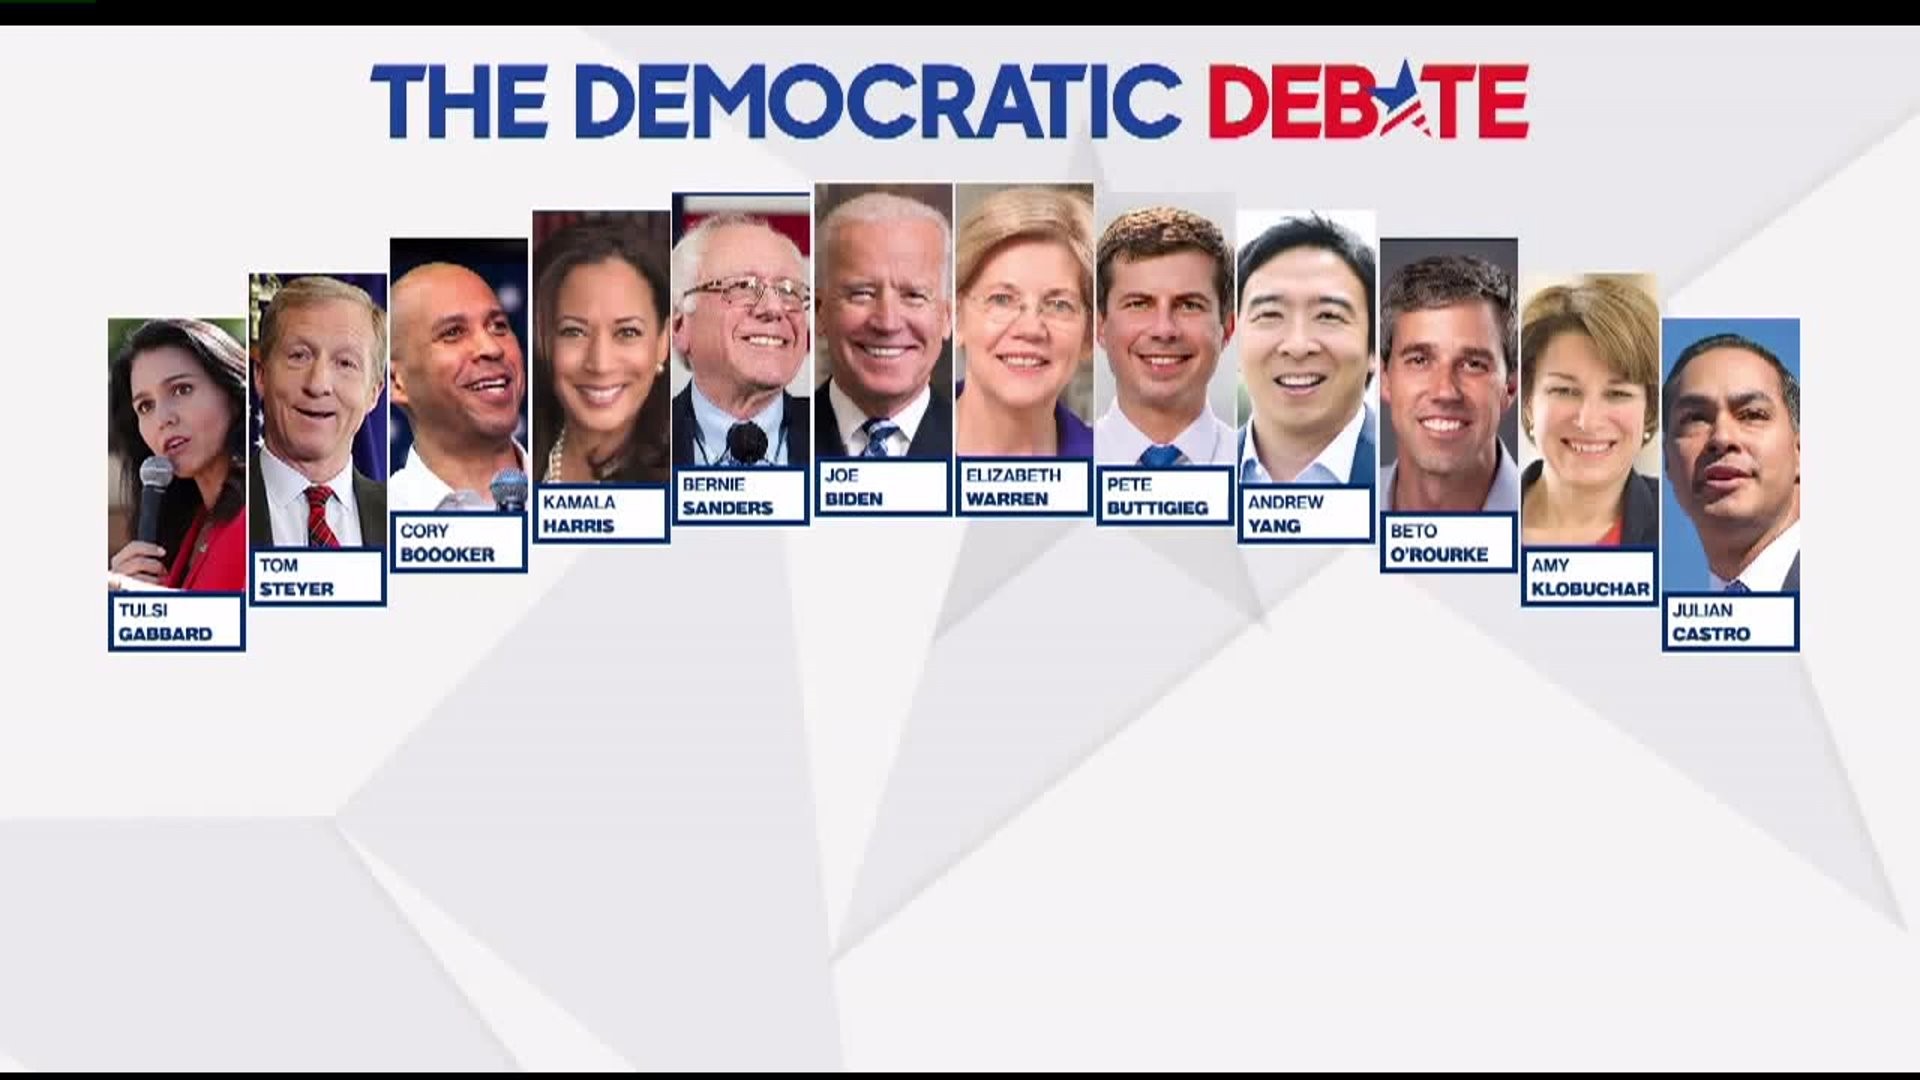 Here`s what you need to know about the Democratic debate on October 15th